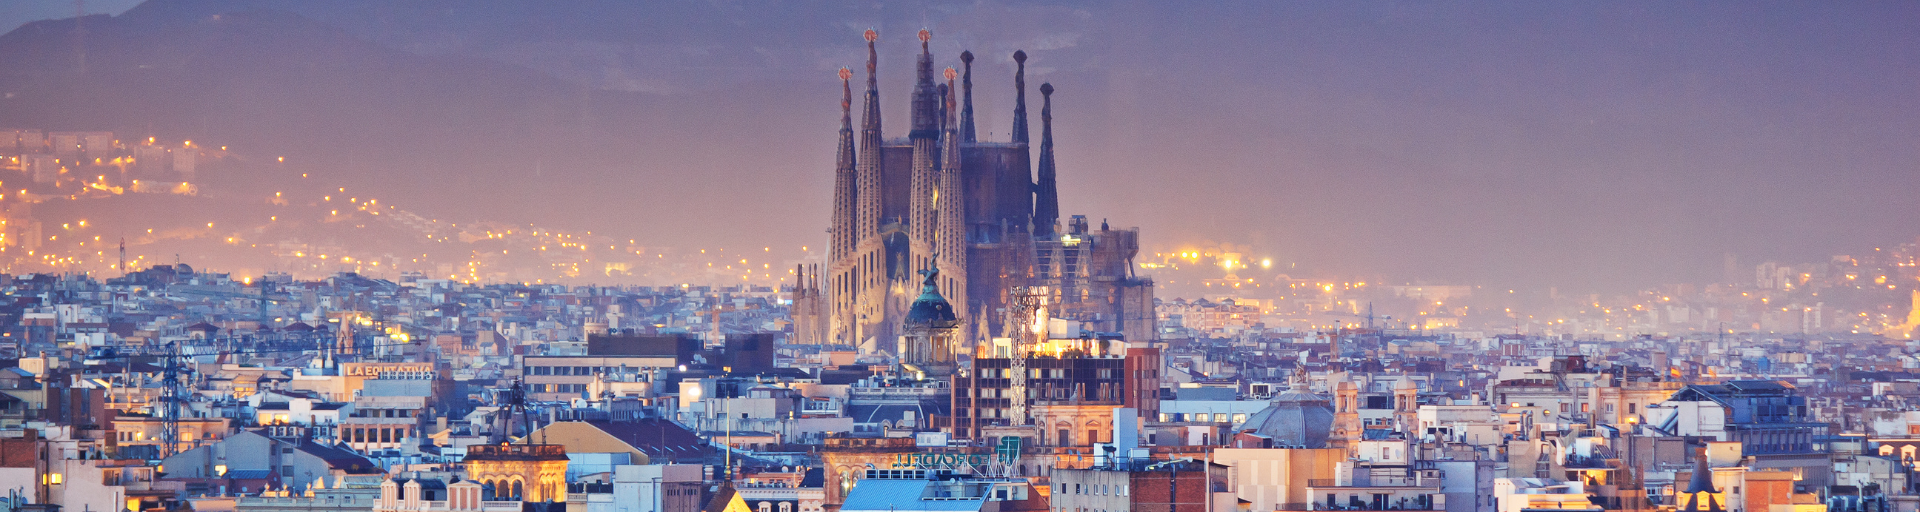 A view of Barcelona on the Global Network Program